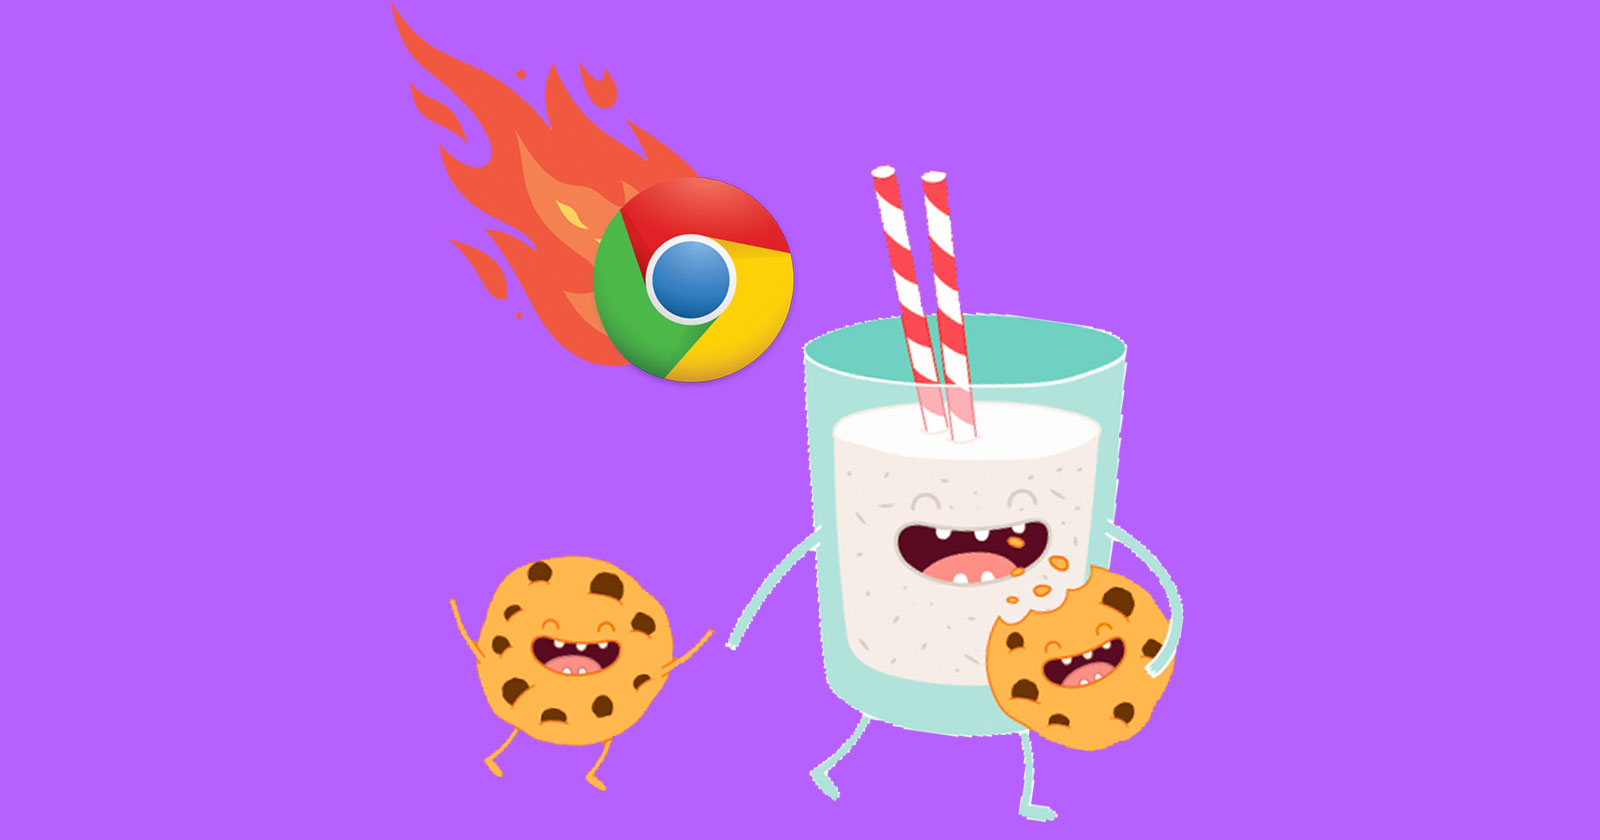 Chrome logo with flames coming down like a meteor at an anthropomorphized glass of milk and cookies walking along obliviously